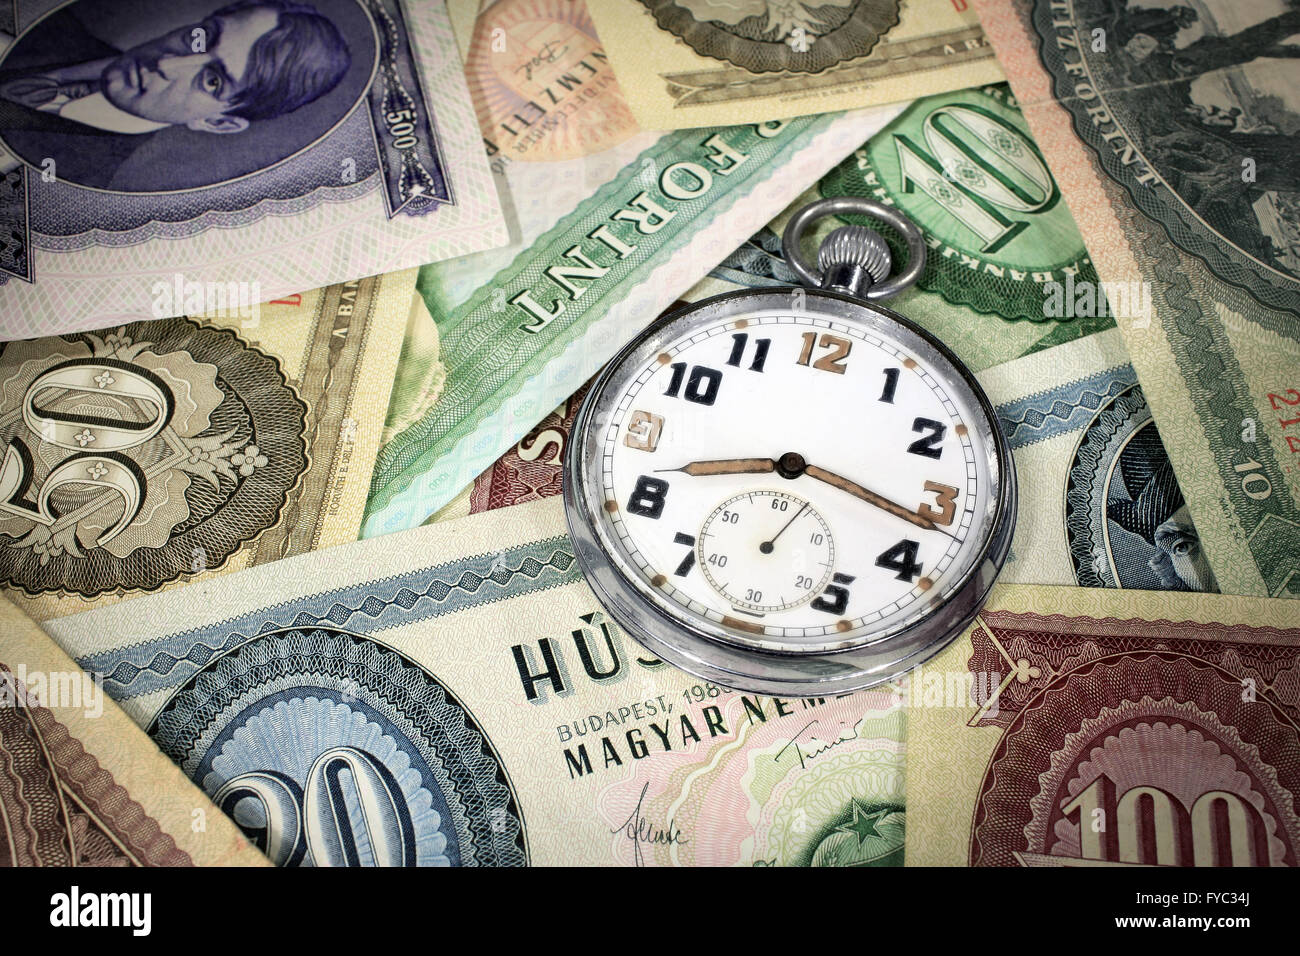 Old hungarian forint money with old pocket watch Stock Photo